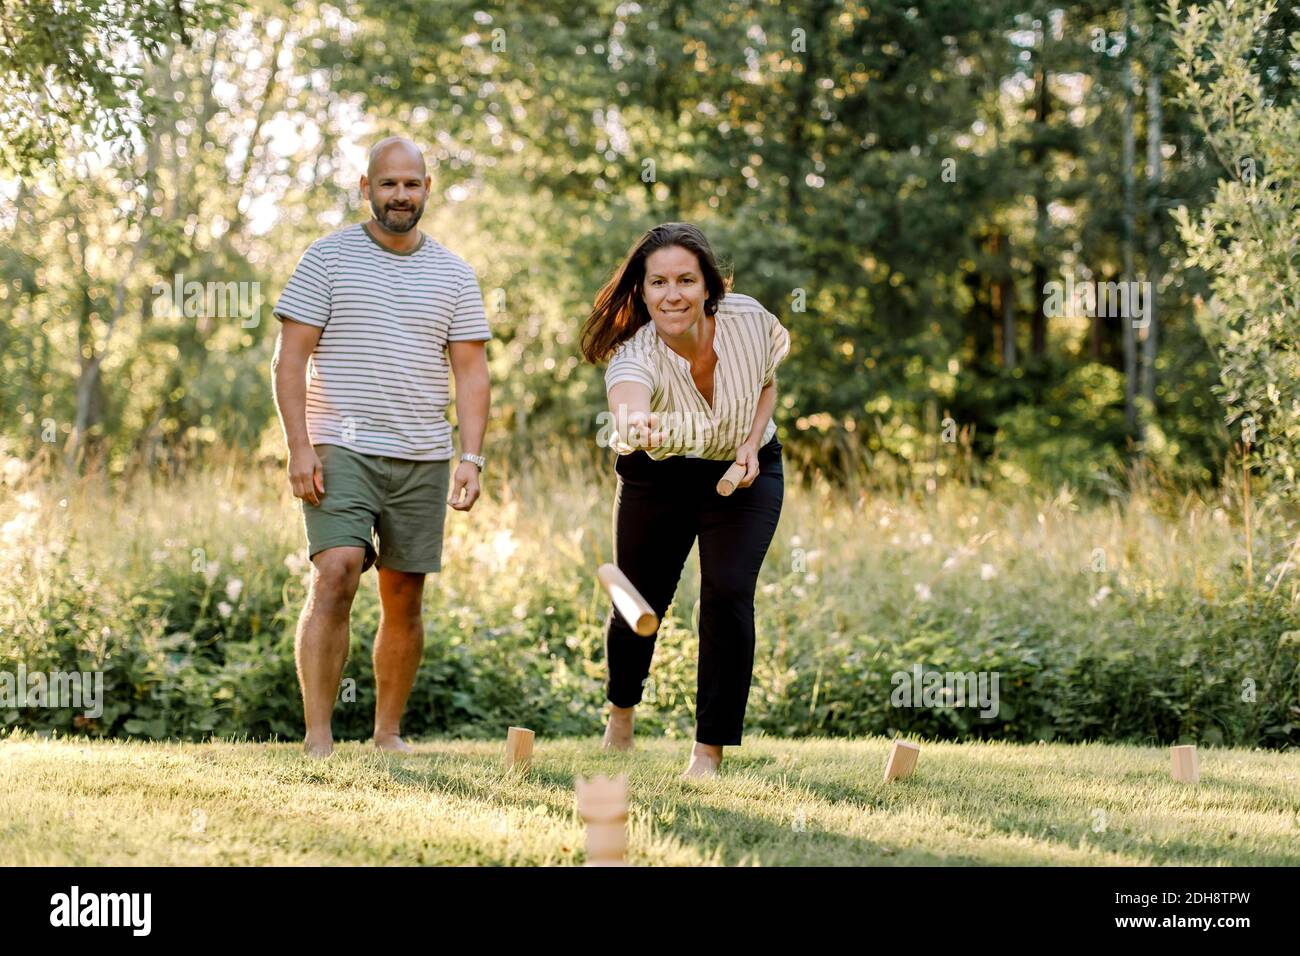 Smiling woman with male partner playing molkky in yard Stock Photo